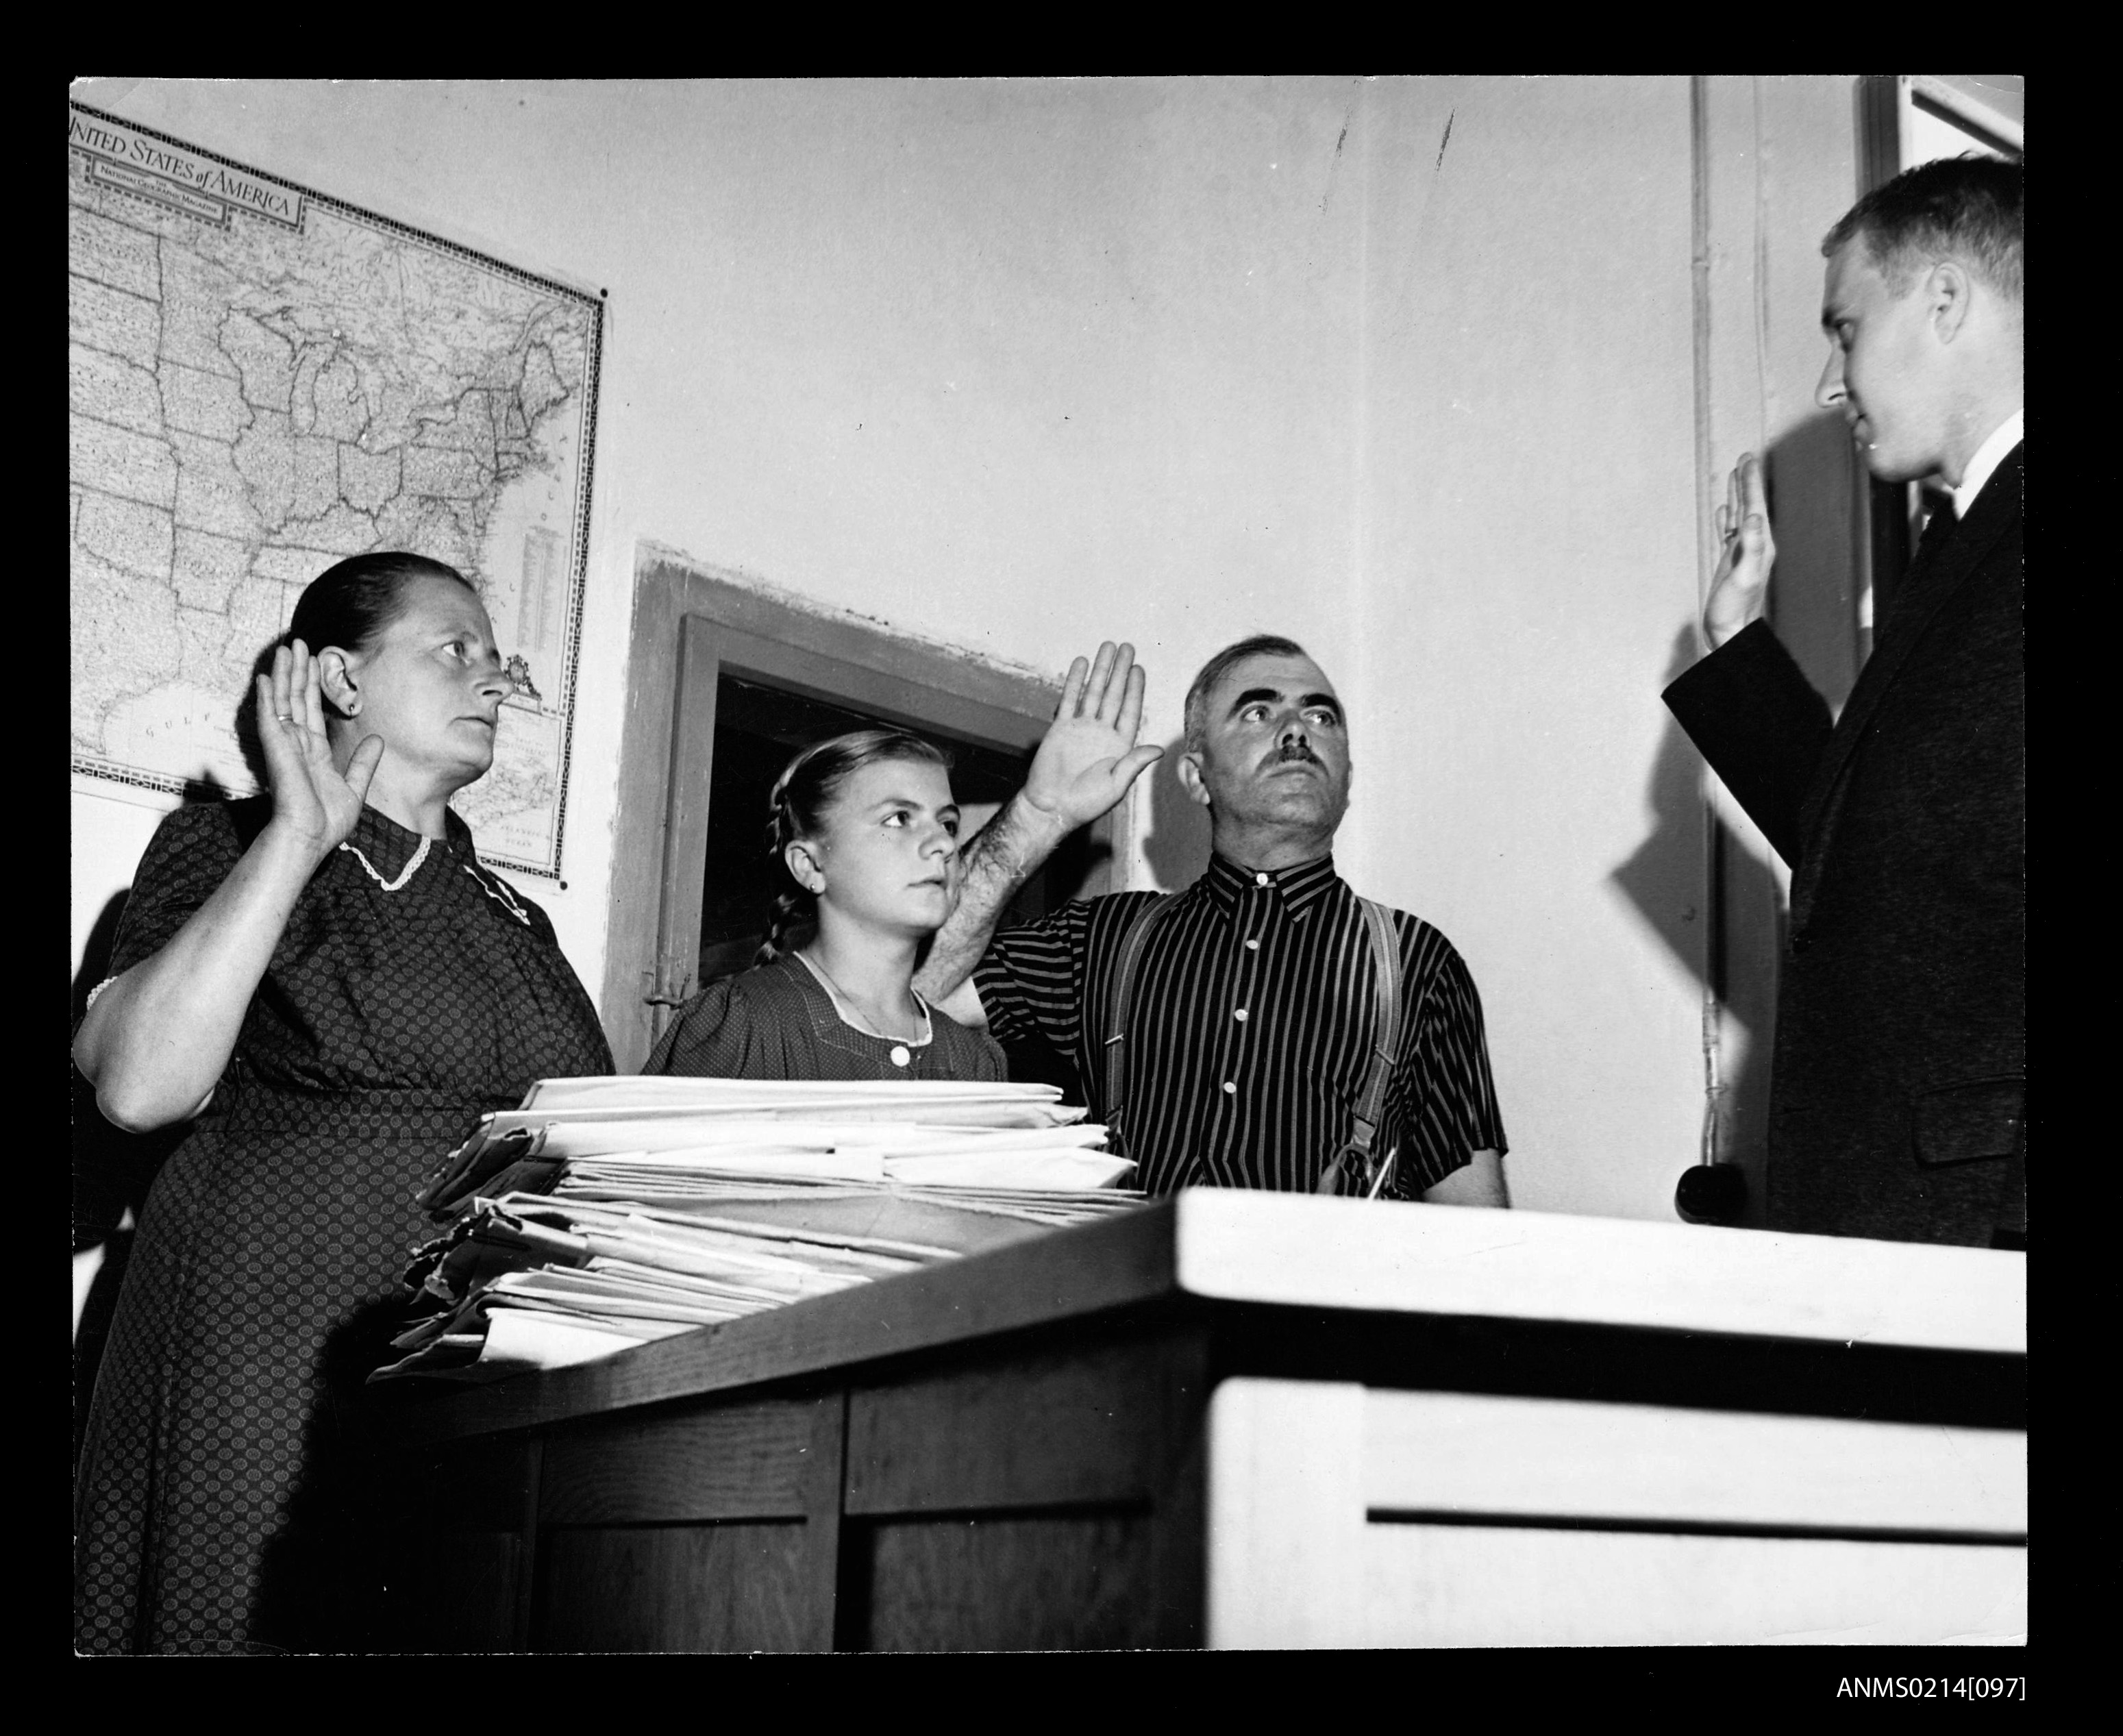 The Schimpf family take the oath for a US visa, Salzburg (8411912099)